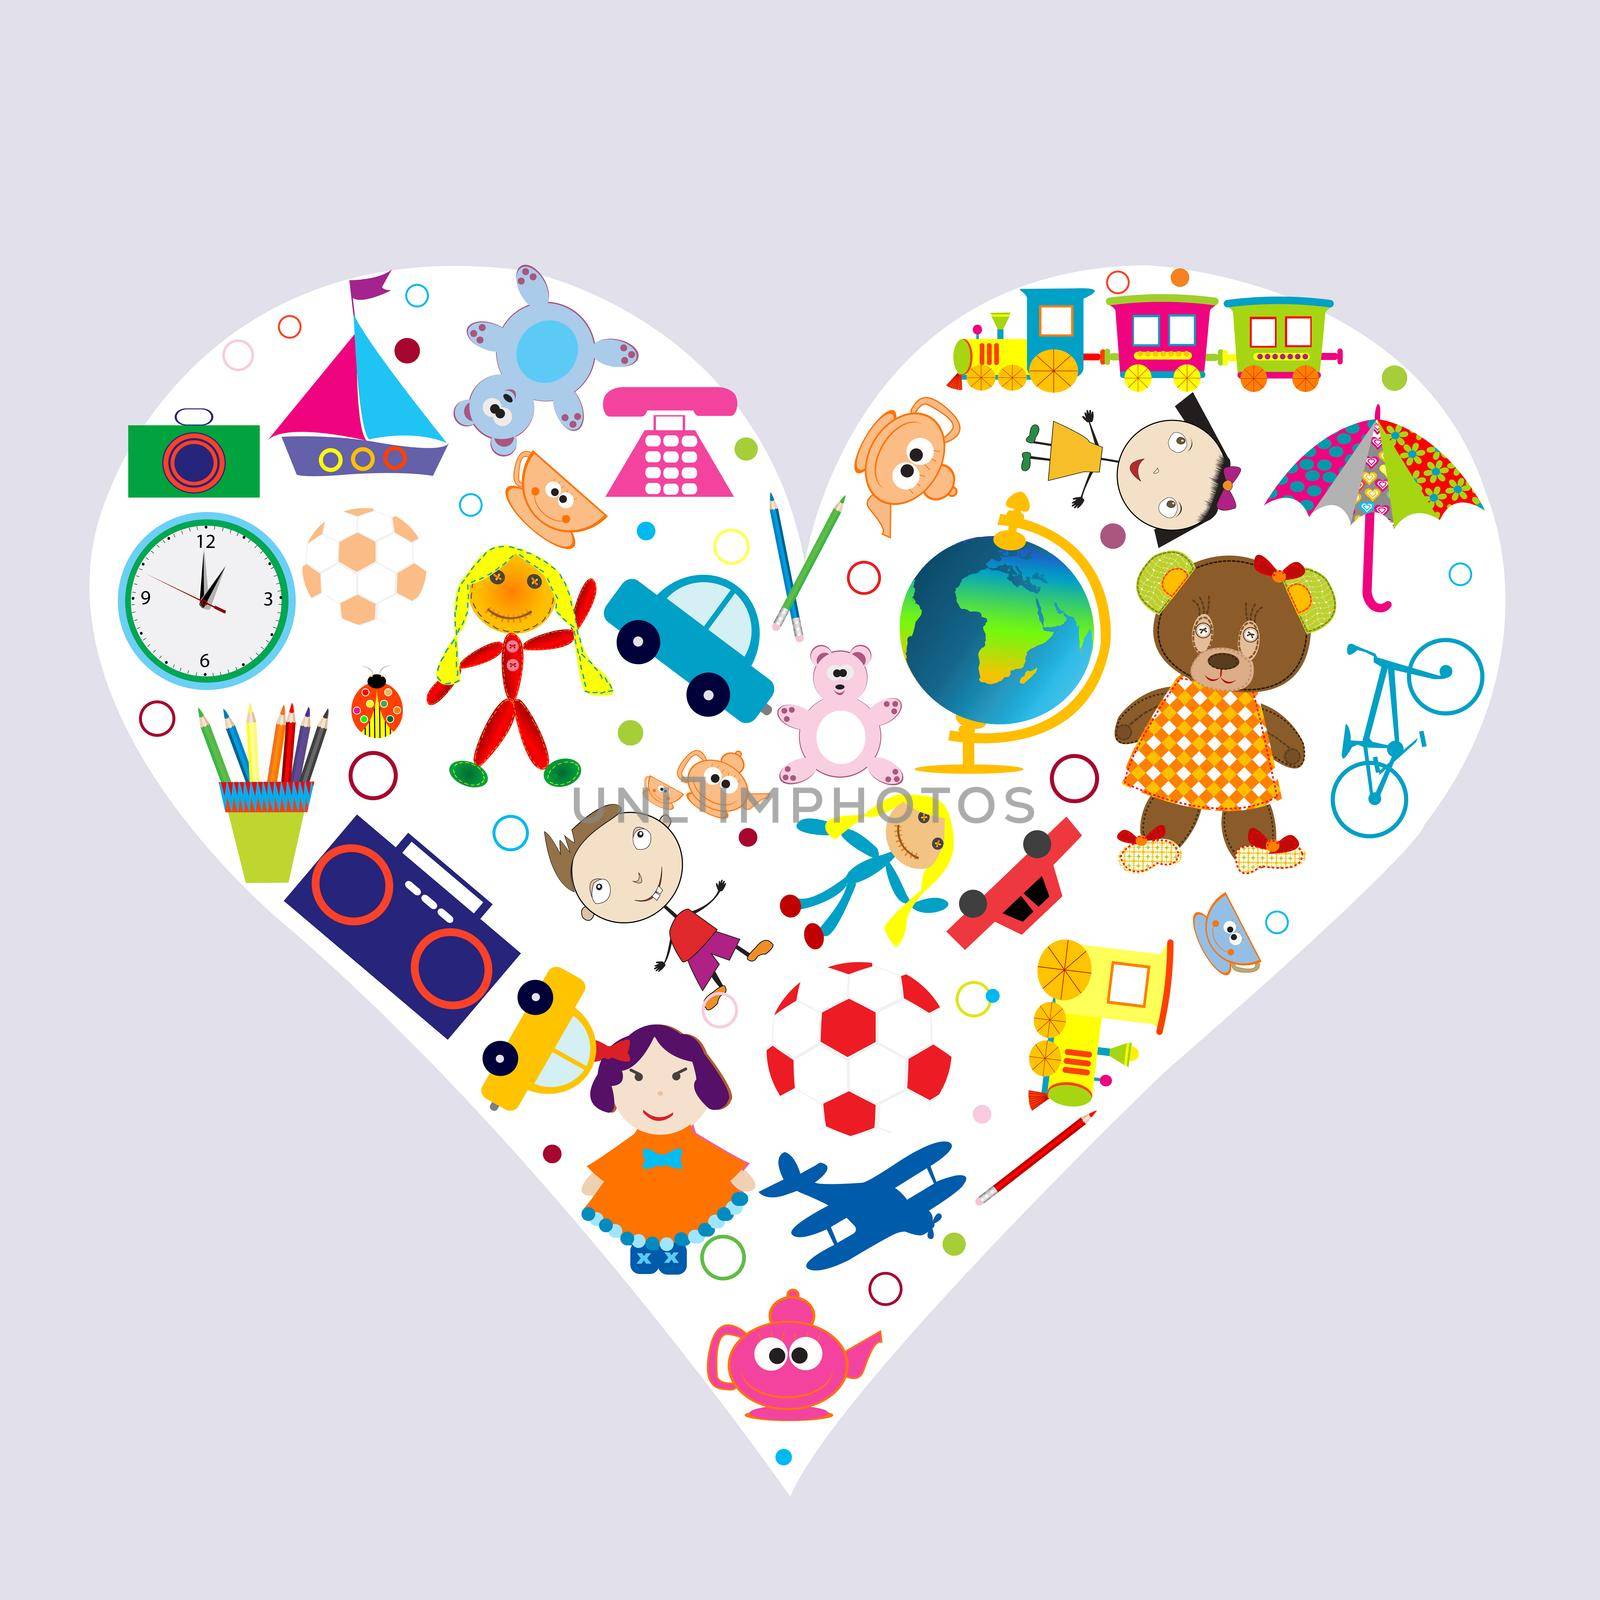 A heart shape made from a pile of toys by hibrida13